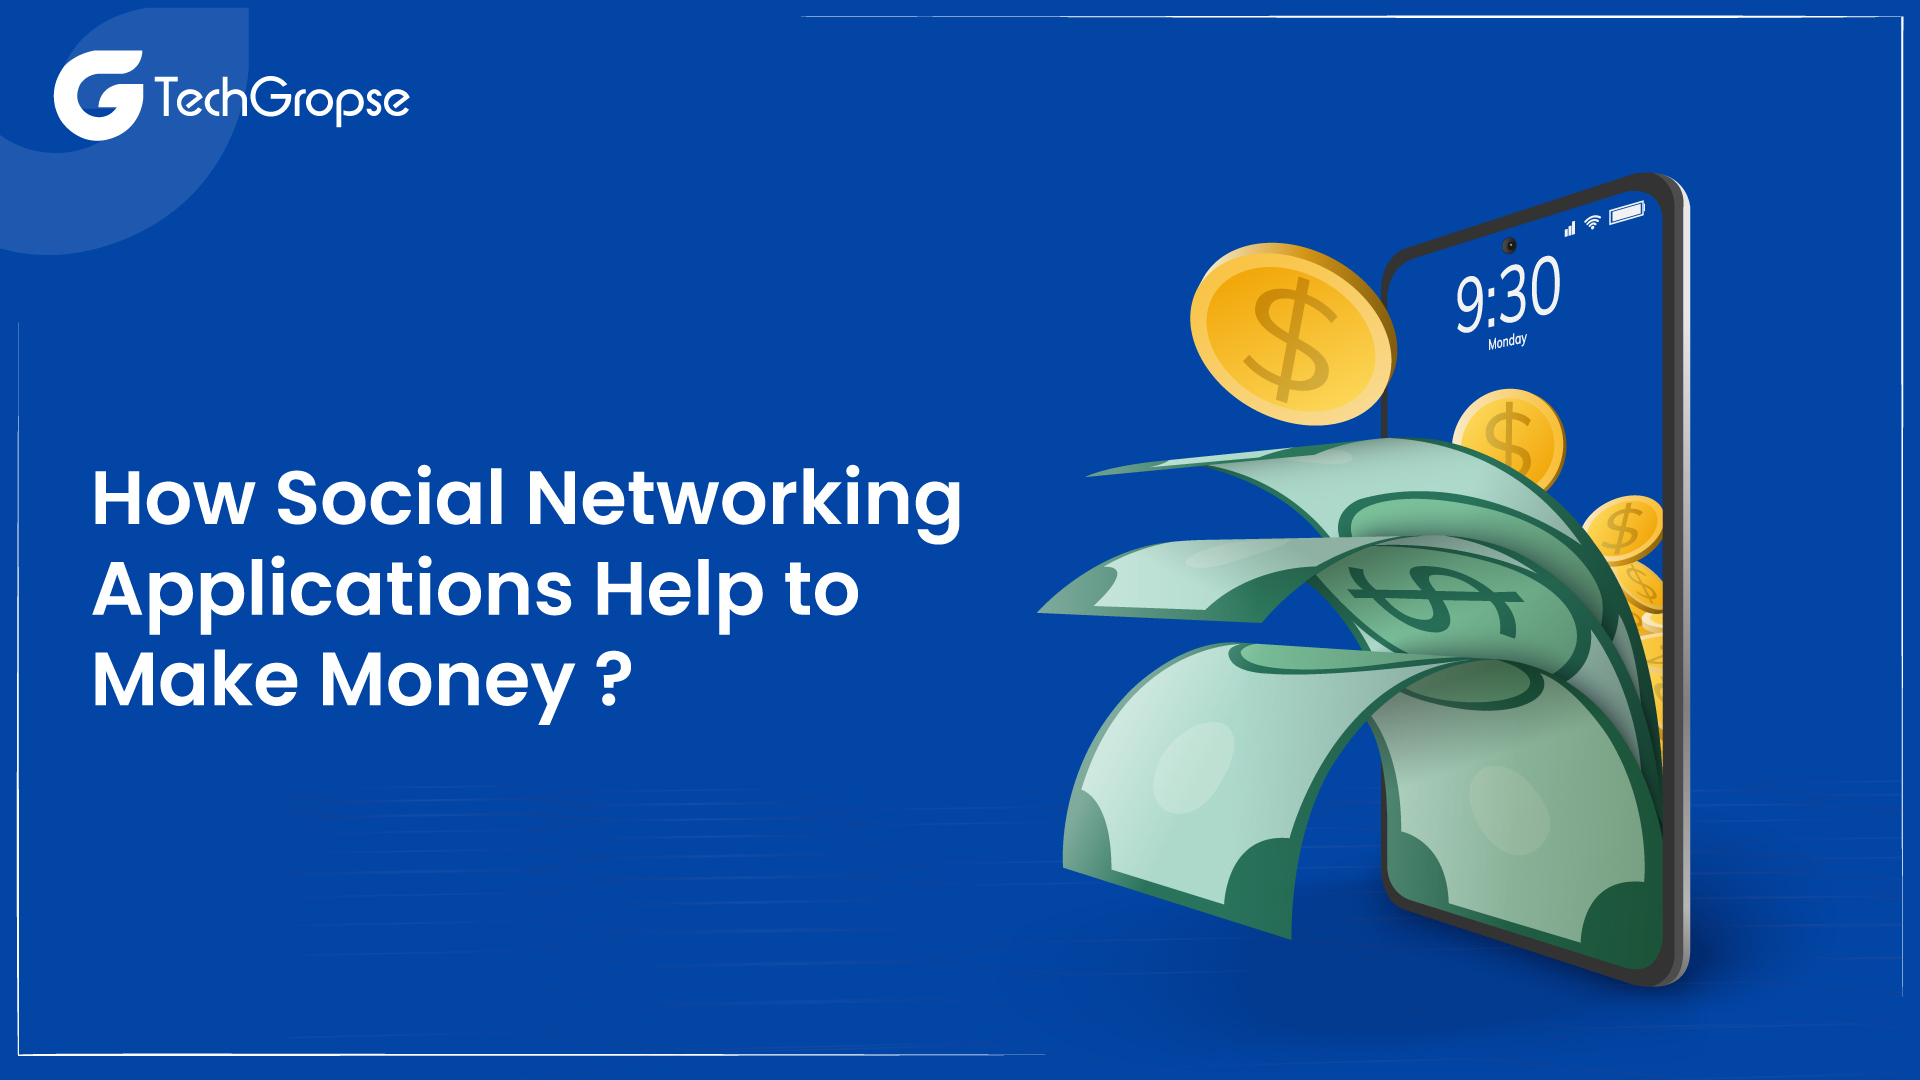 How Social Networking Applications Help to Make Money